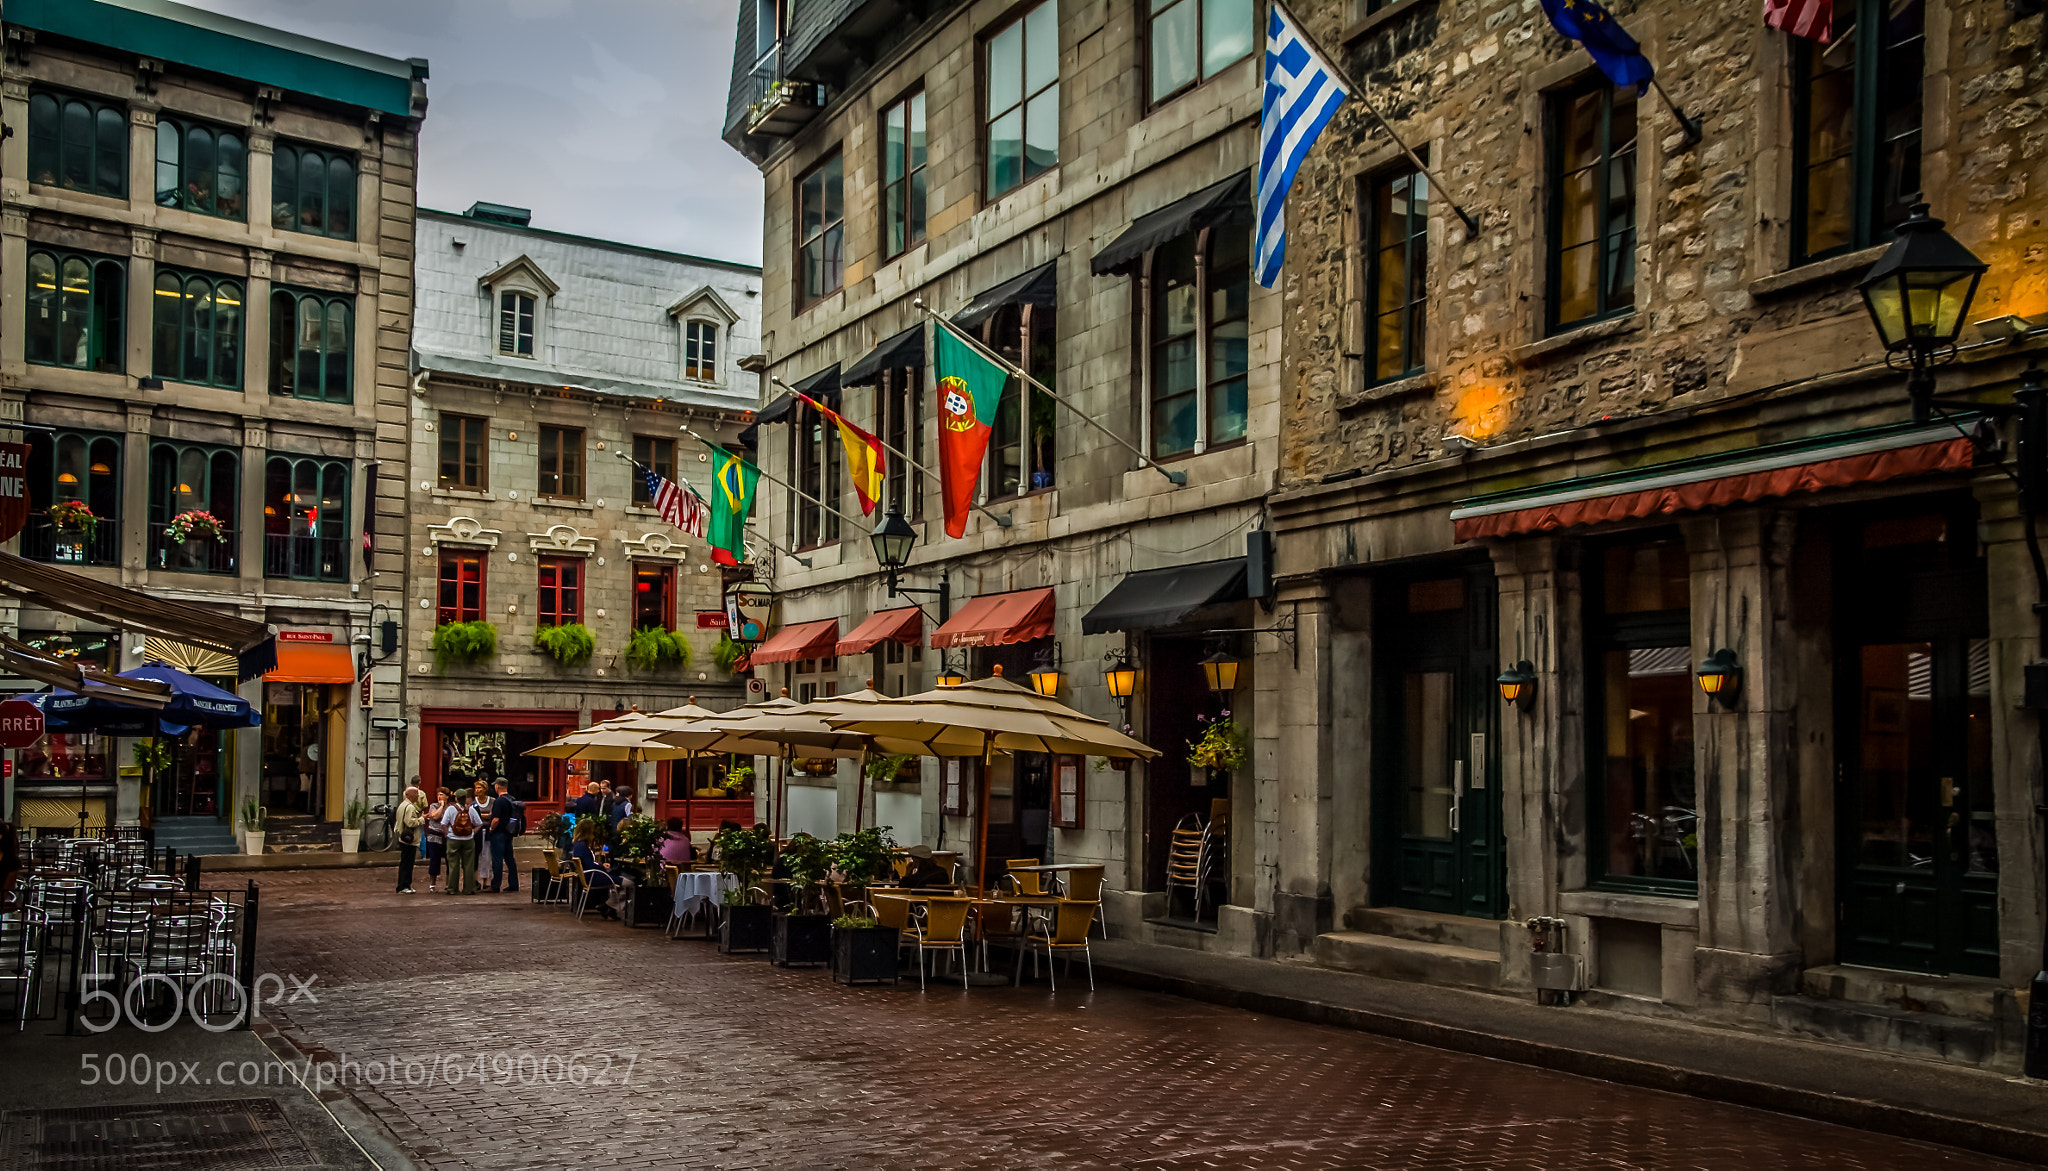 Photograph Old Town Montreal by Ron Svihlik on 500px